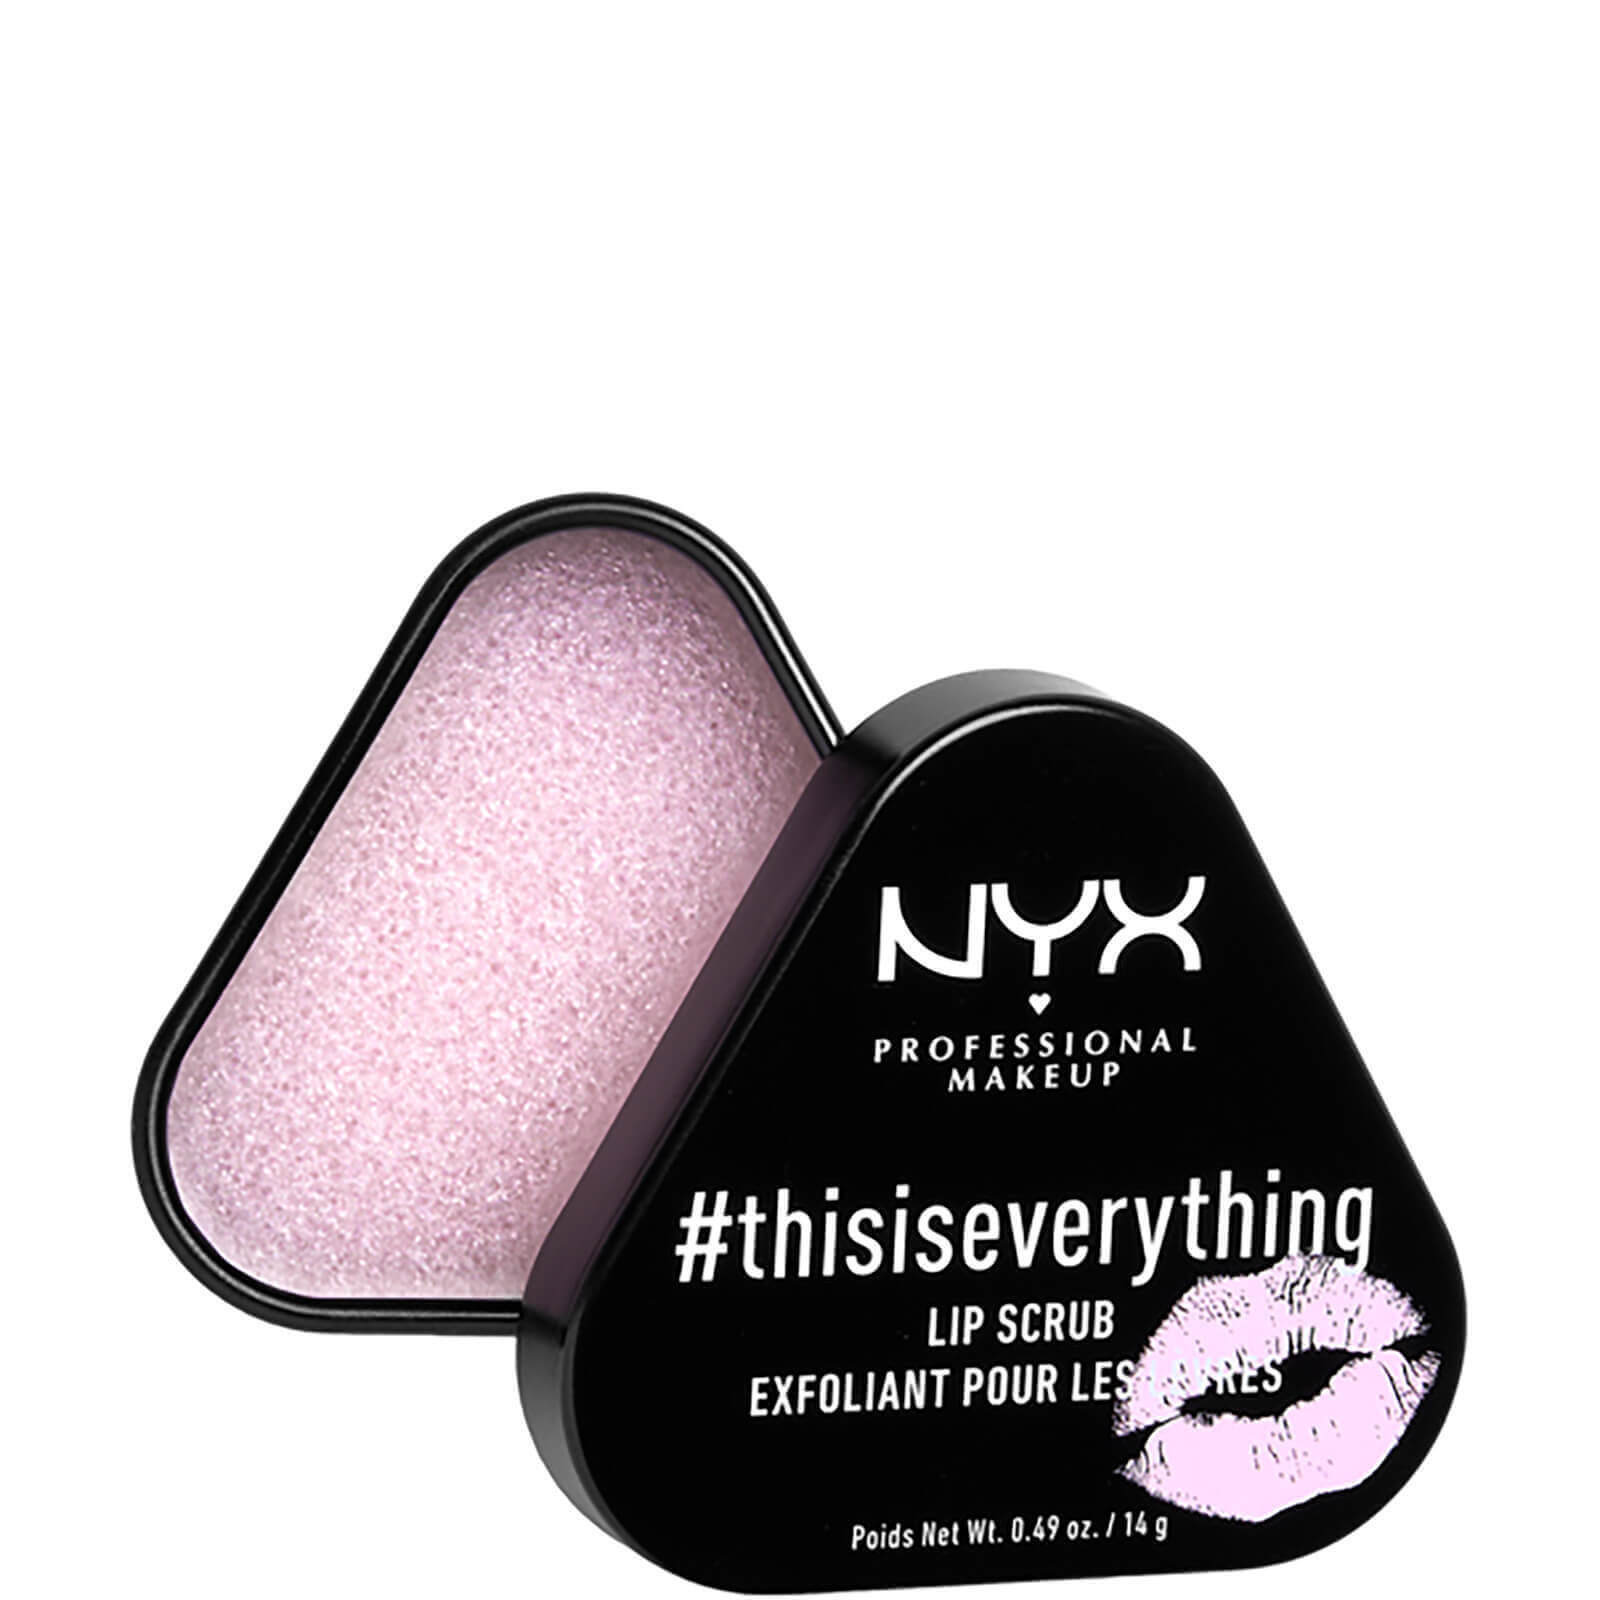 Image of NYX Professional Makeup This is Everything Lip Scrub